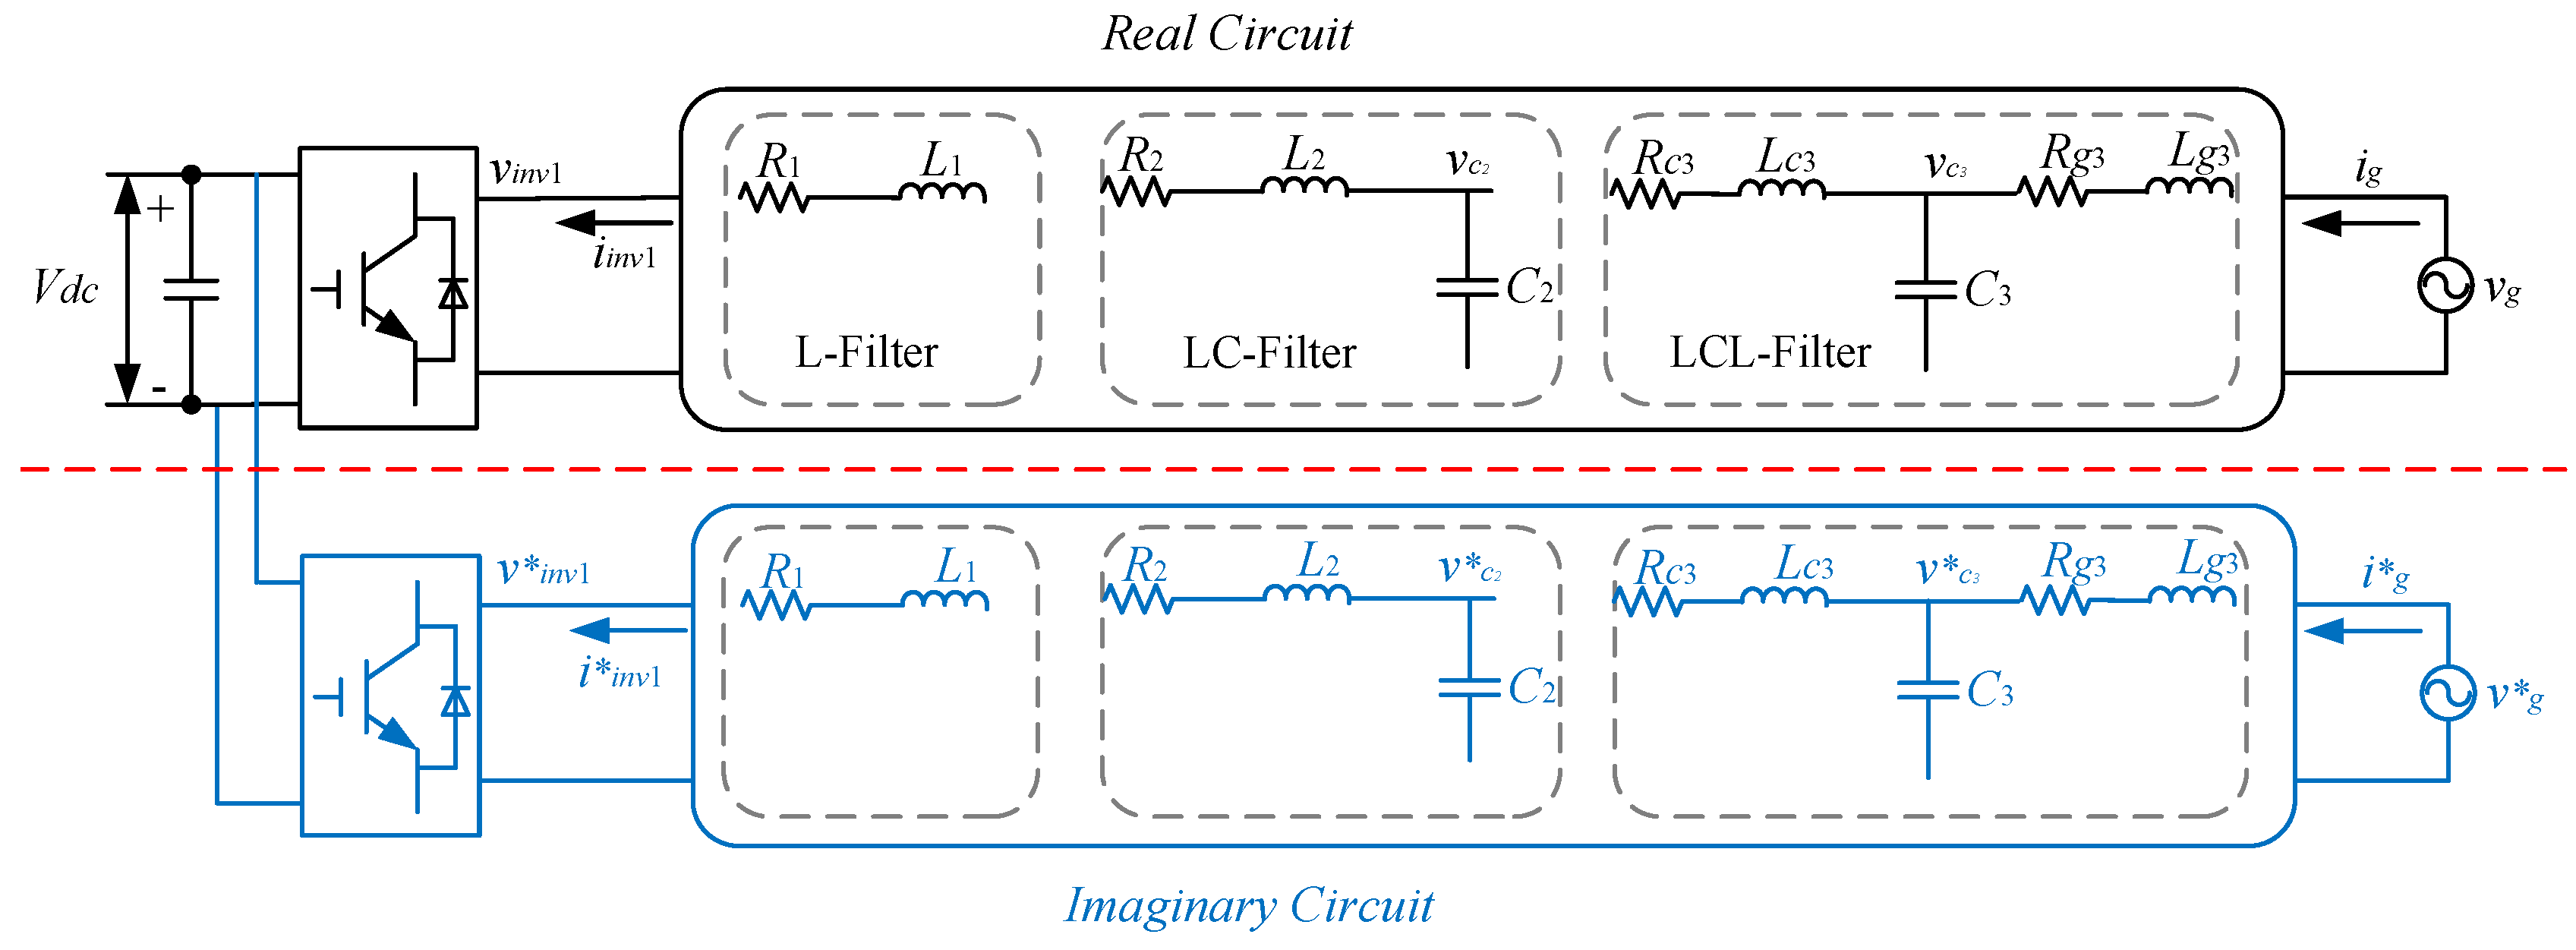 Energies | Free Full-Text | A Novel Neural Network Vector Control for Single -Phase Grid-Connected Converters with L, LC and LCL Filters